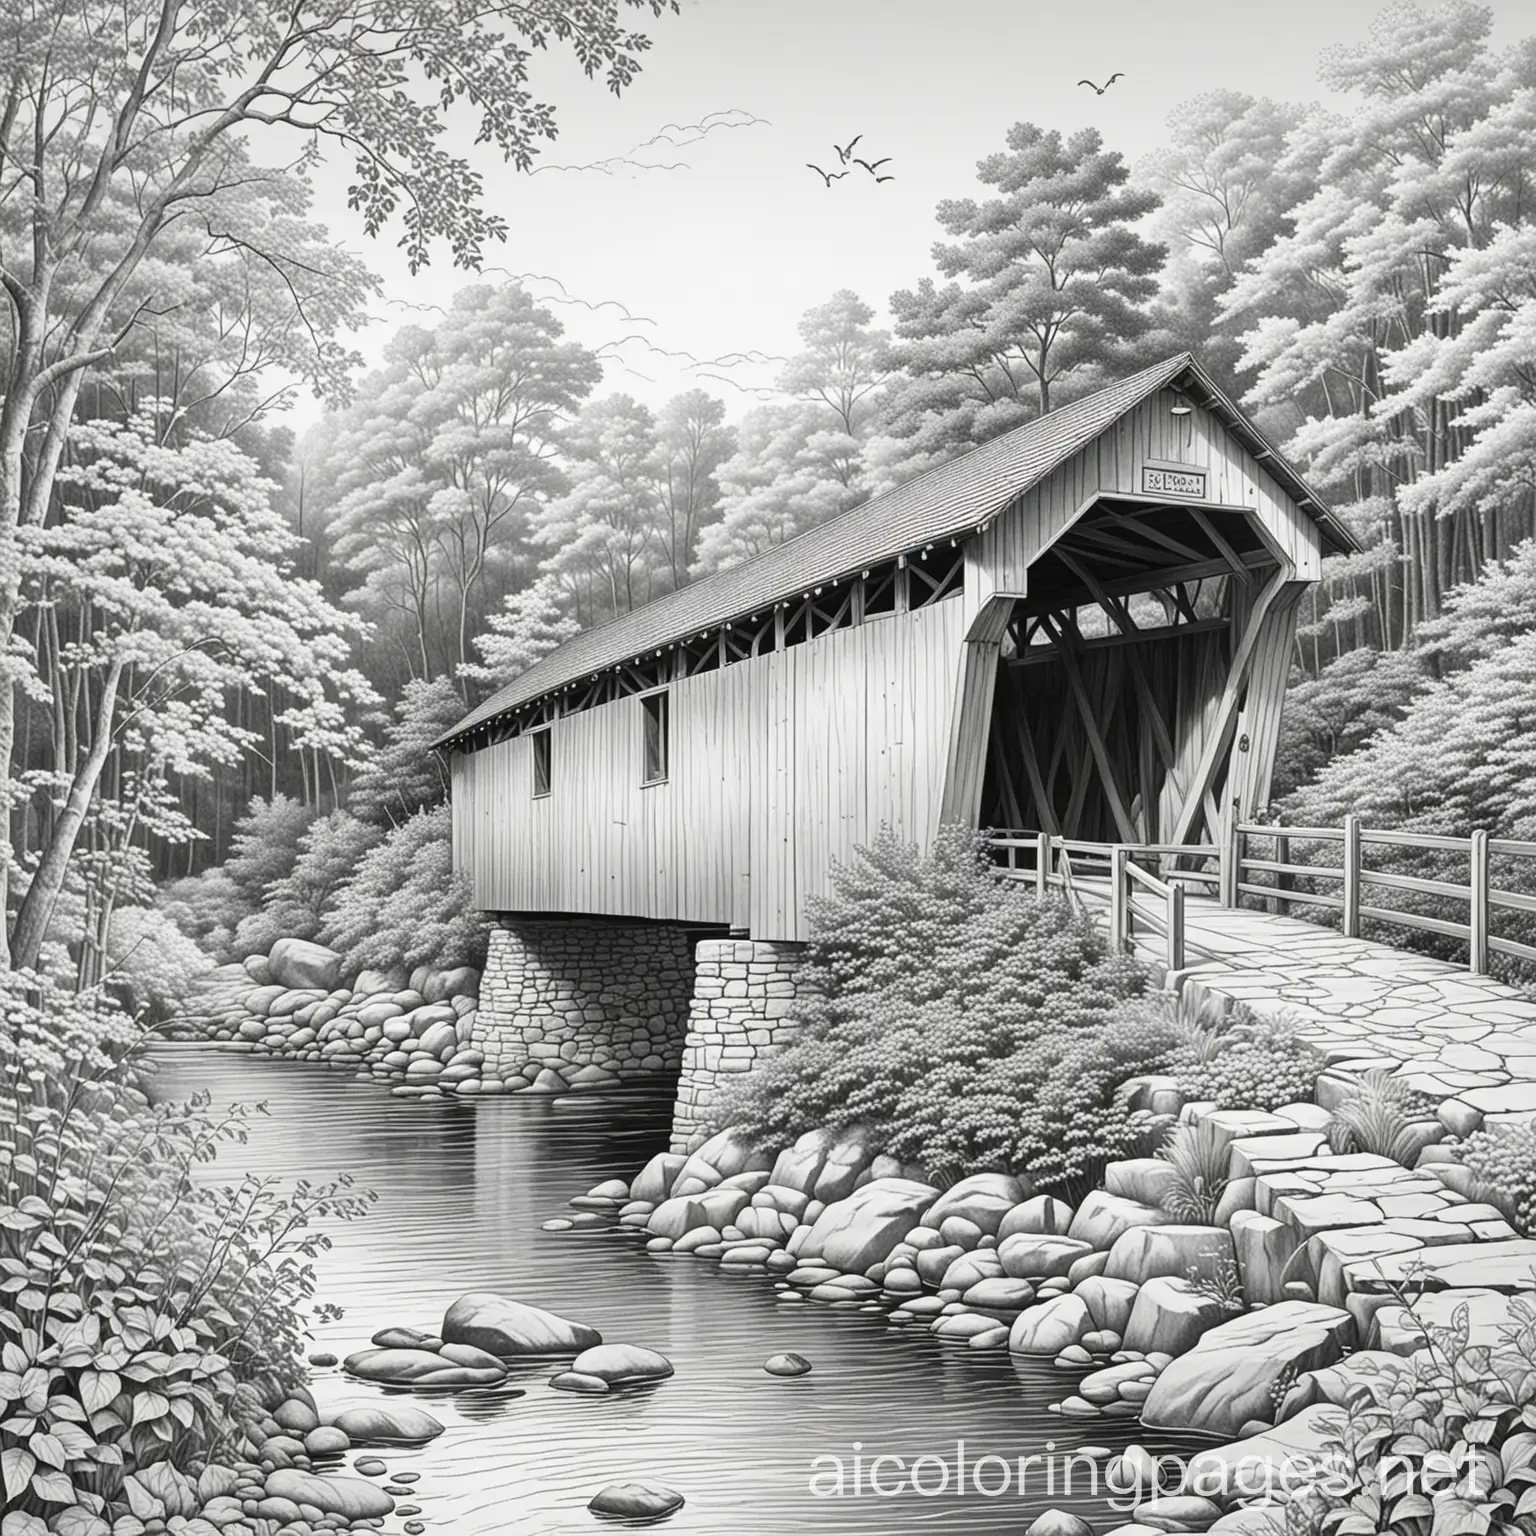 create and black and white coloring book picture of a covered bridge. there is some ivy growing on the bridge. it is an aerial view of the bridge. realistic. . It is in the fall and leaves are falling off the trees. There is some rolling hills in the distance as the sun sets. clean crisp lines. adult coloring book., Coloring Page, black and white, line art, white background, Simplicity, Ample White Space. The background of the coloring page is plain white to make it easy for young children to color within the lines. The outlines of all the subjects are easy to distinguish, making it simple for kids to color without too much difficulty